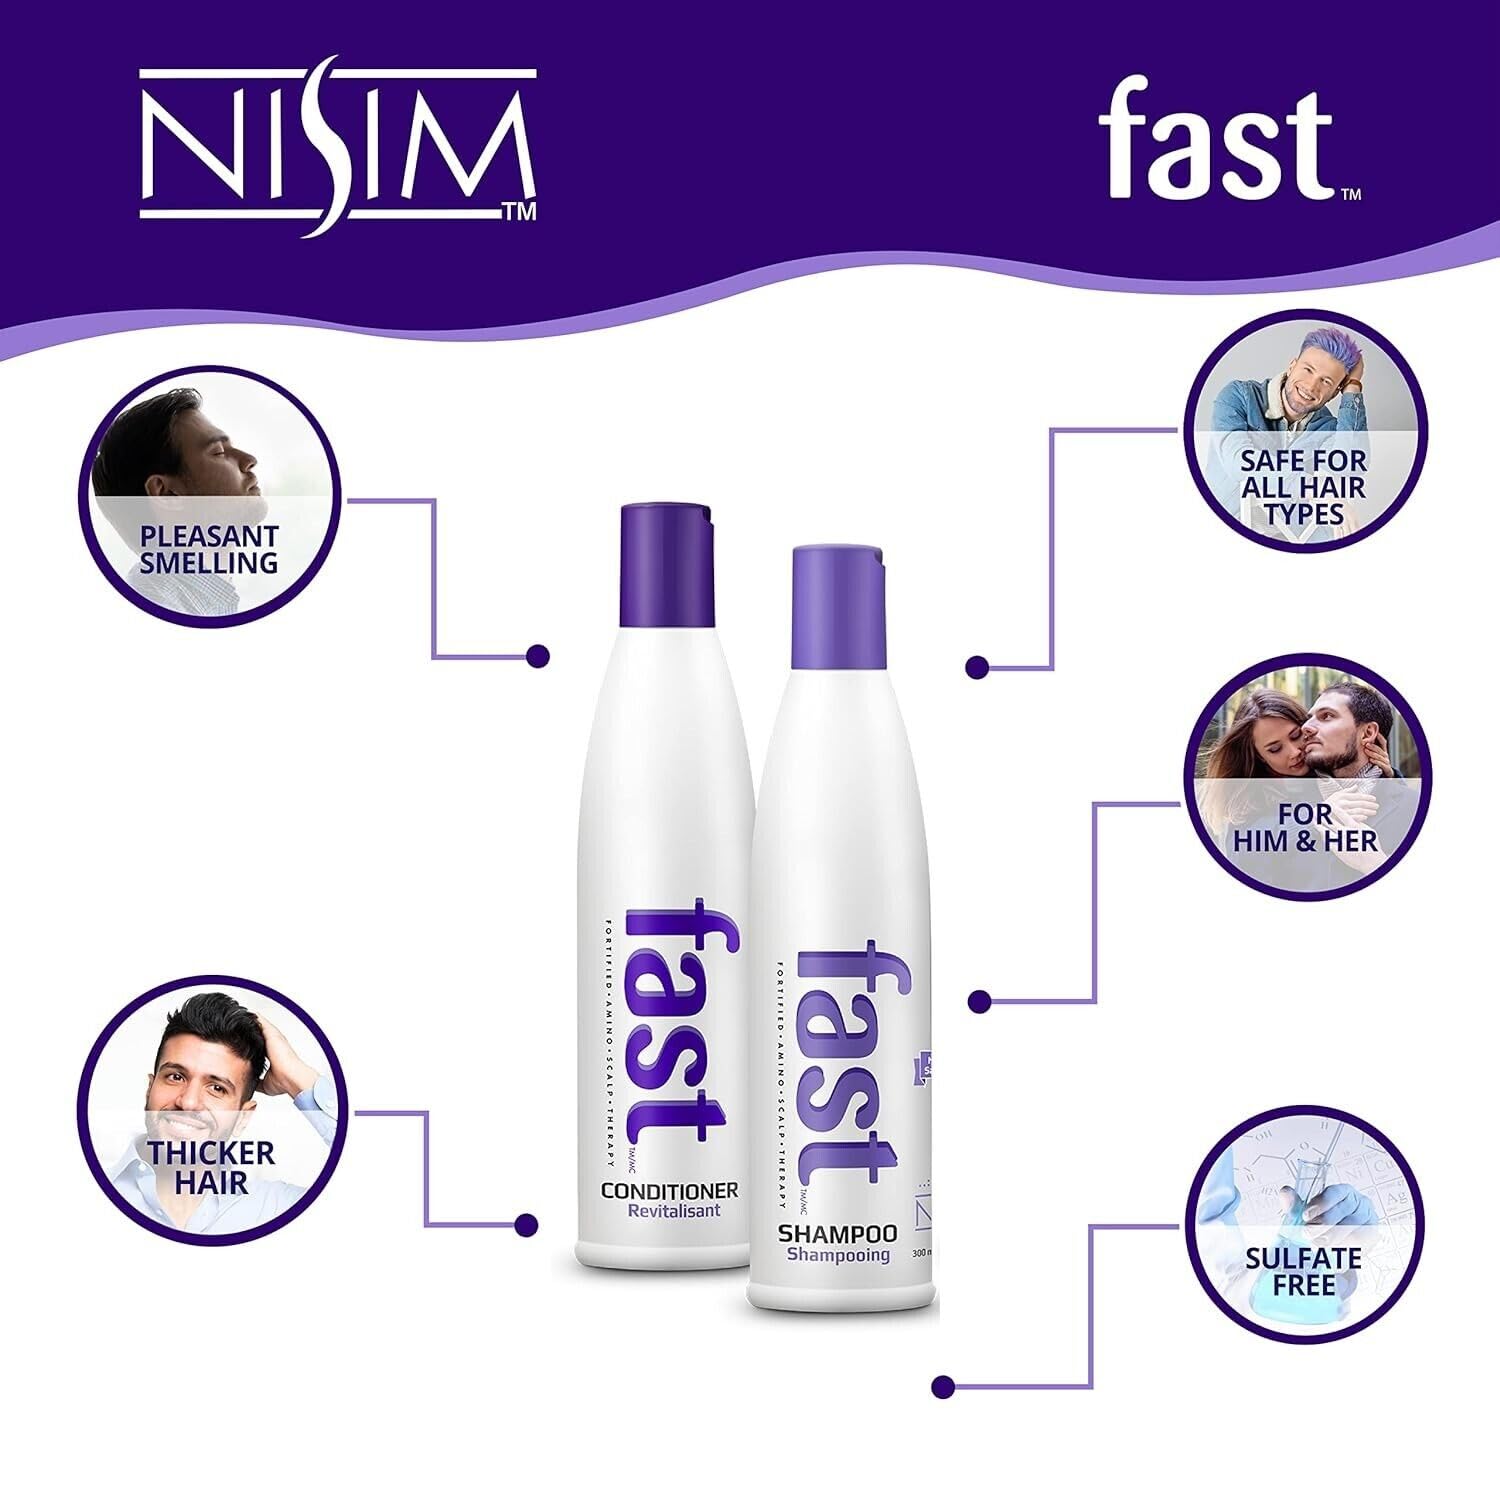 Nisim - F.A.S.T. Fortified Amino Scalp Therapy Shampoo and Conditioner with Scalp Treatment : Beauty & Personal Care